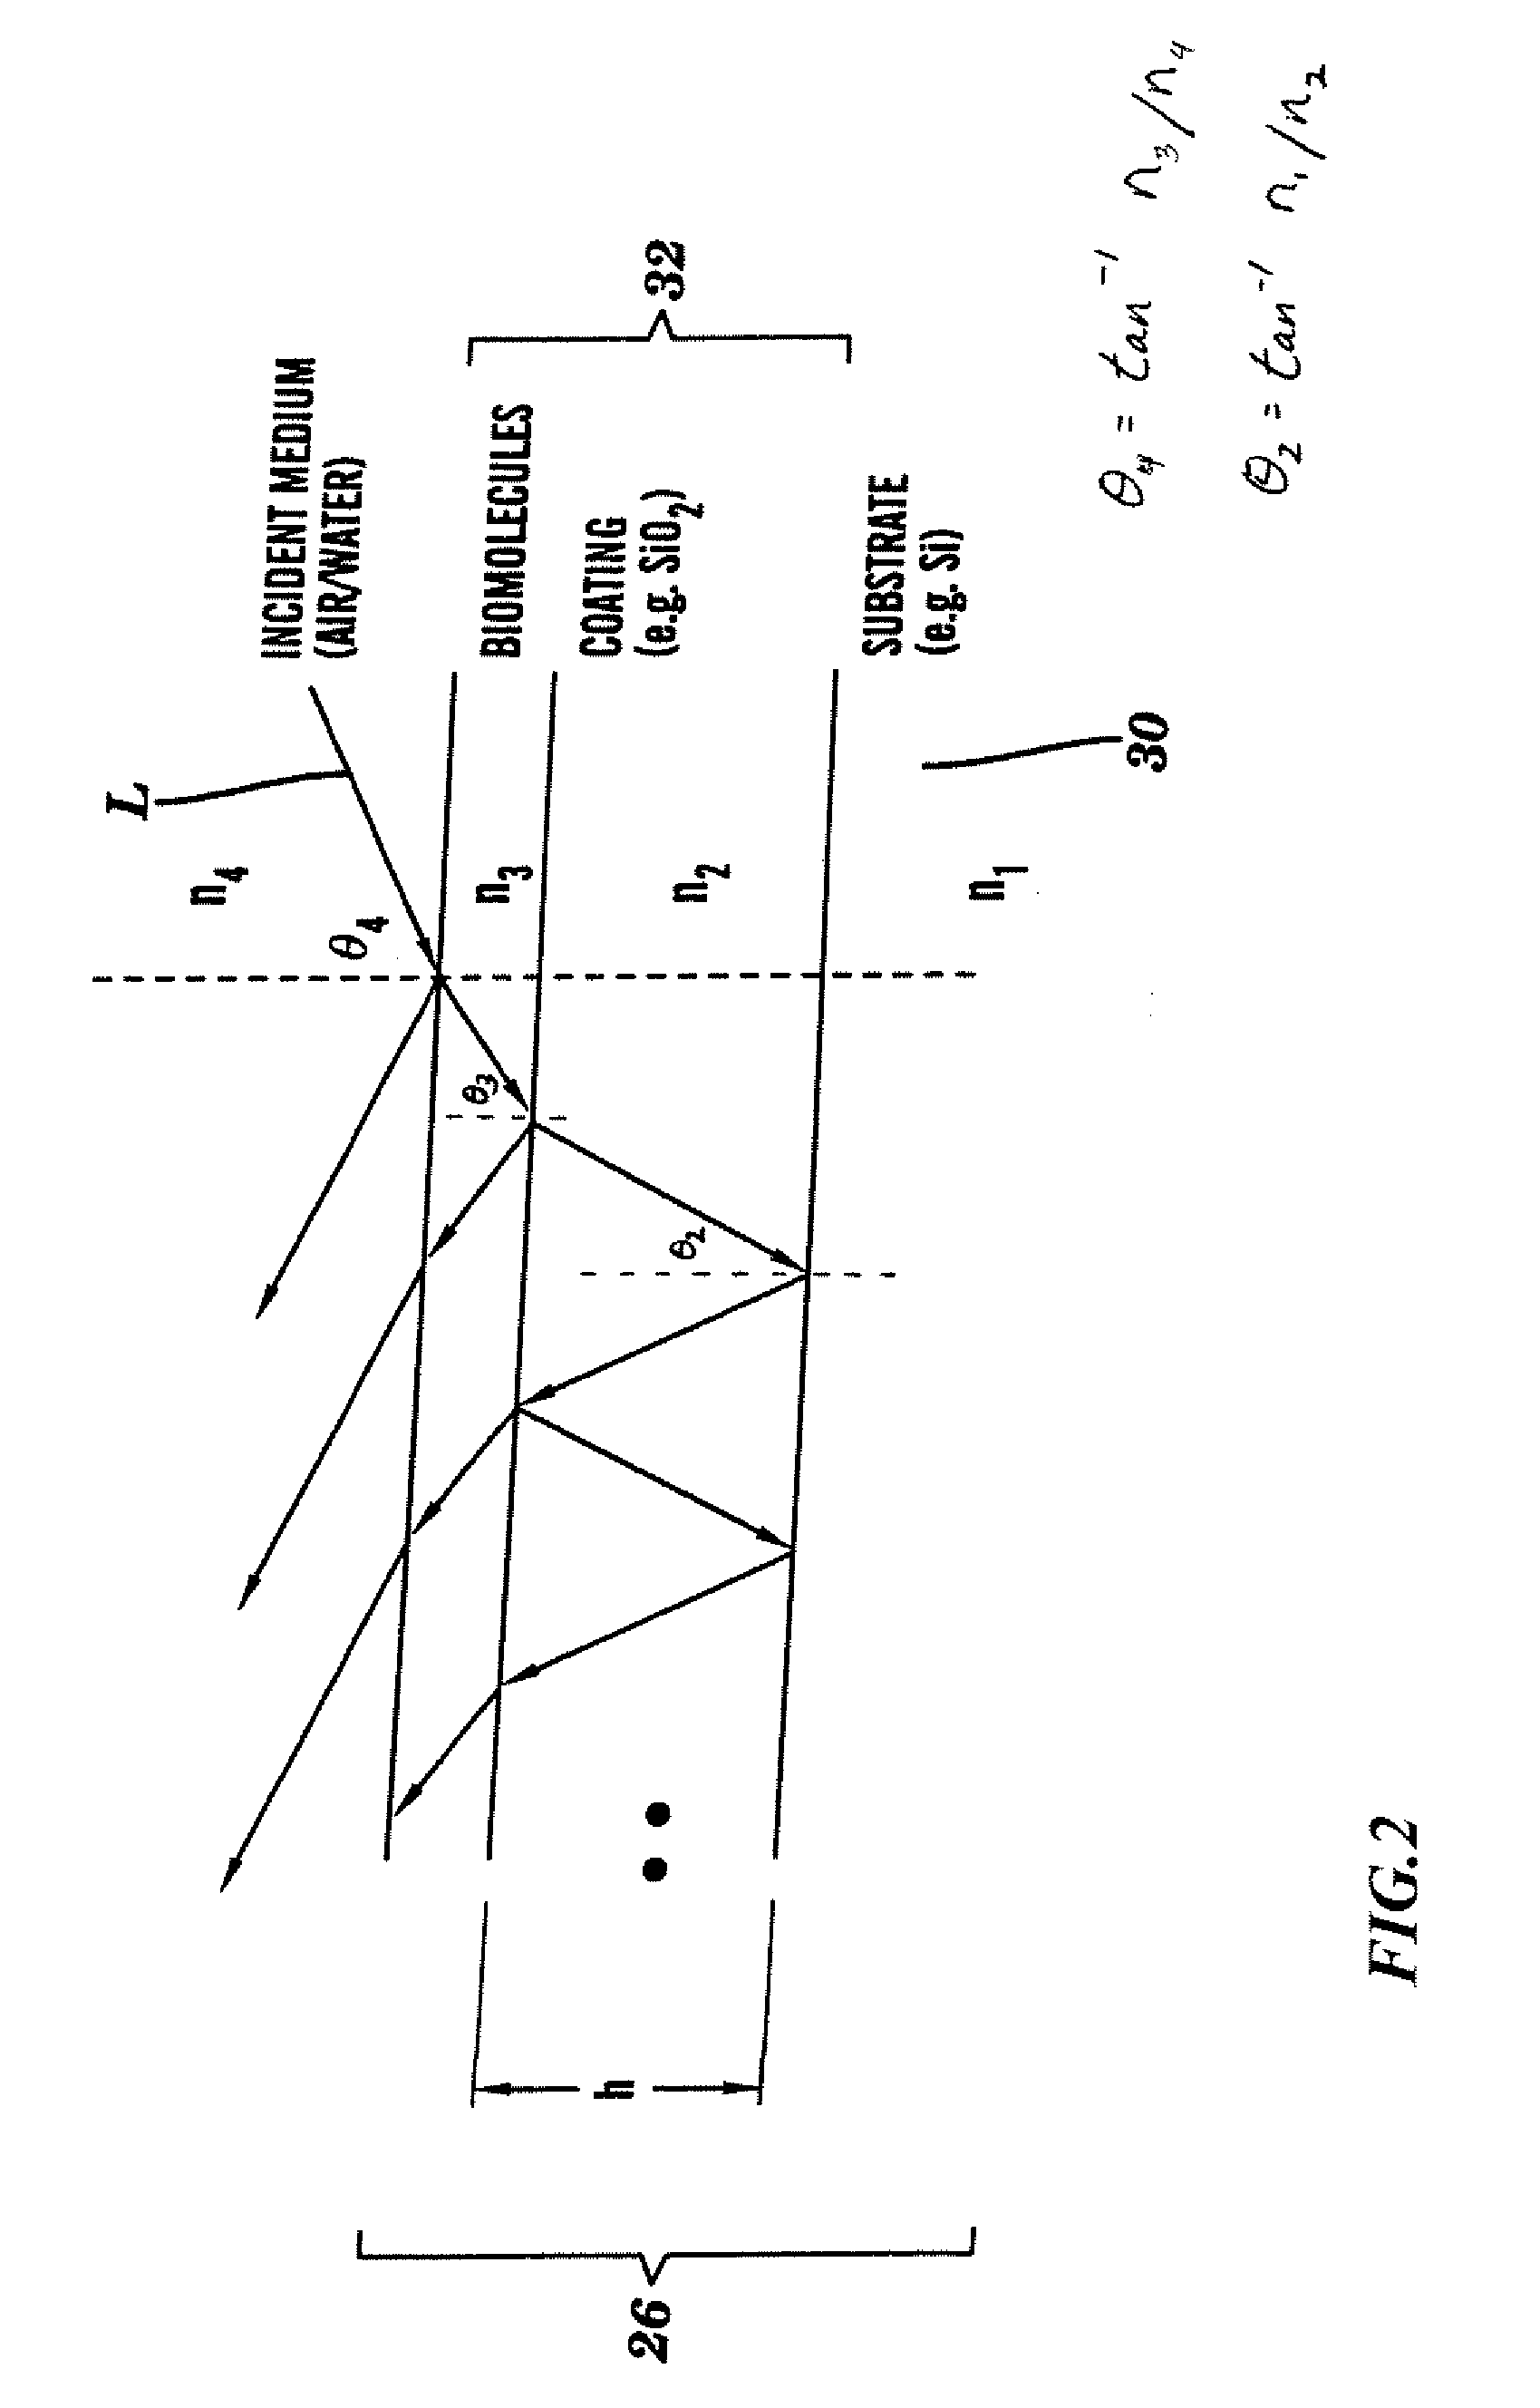 System and method for brewster angle straddle interferometry